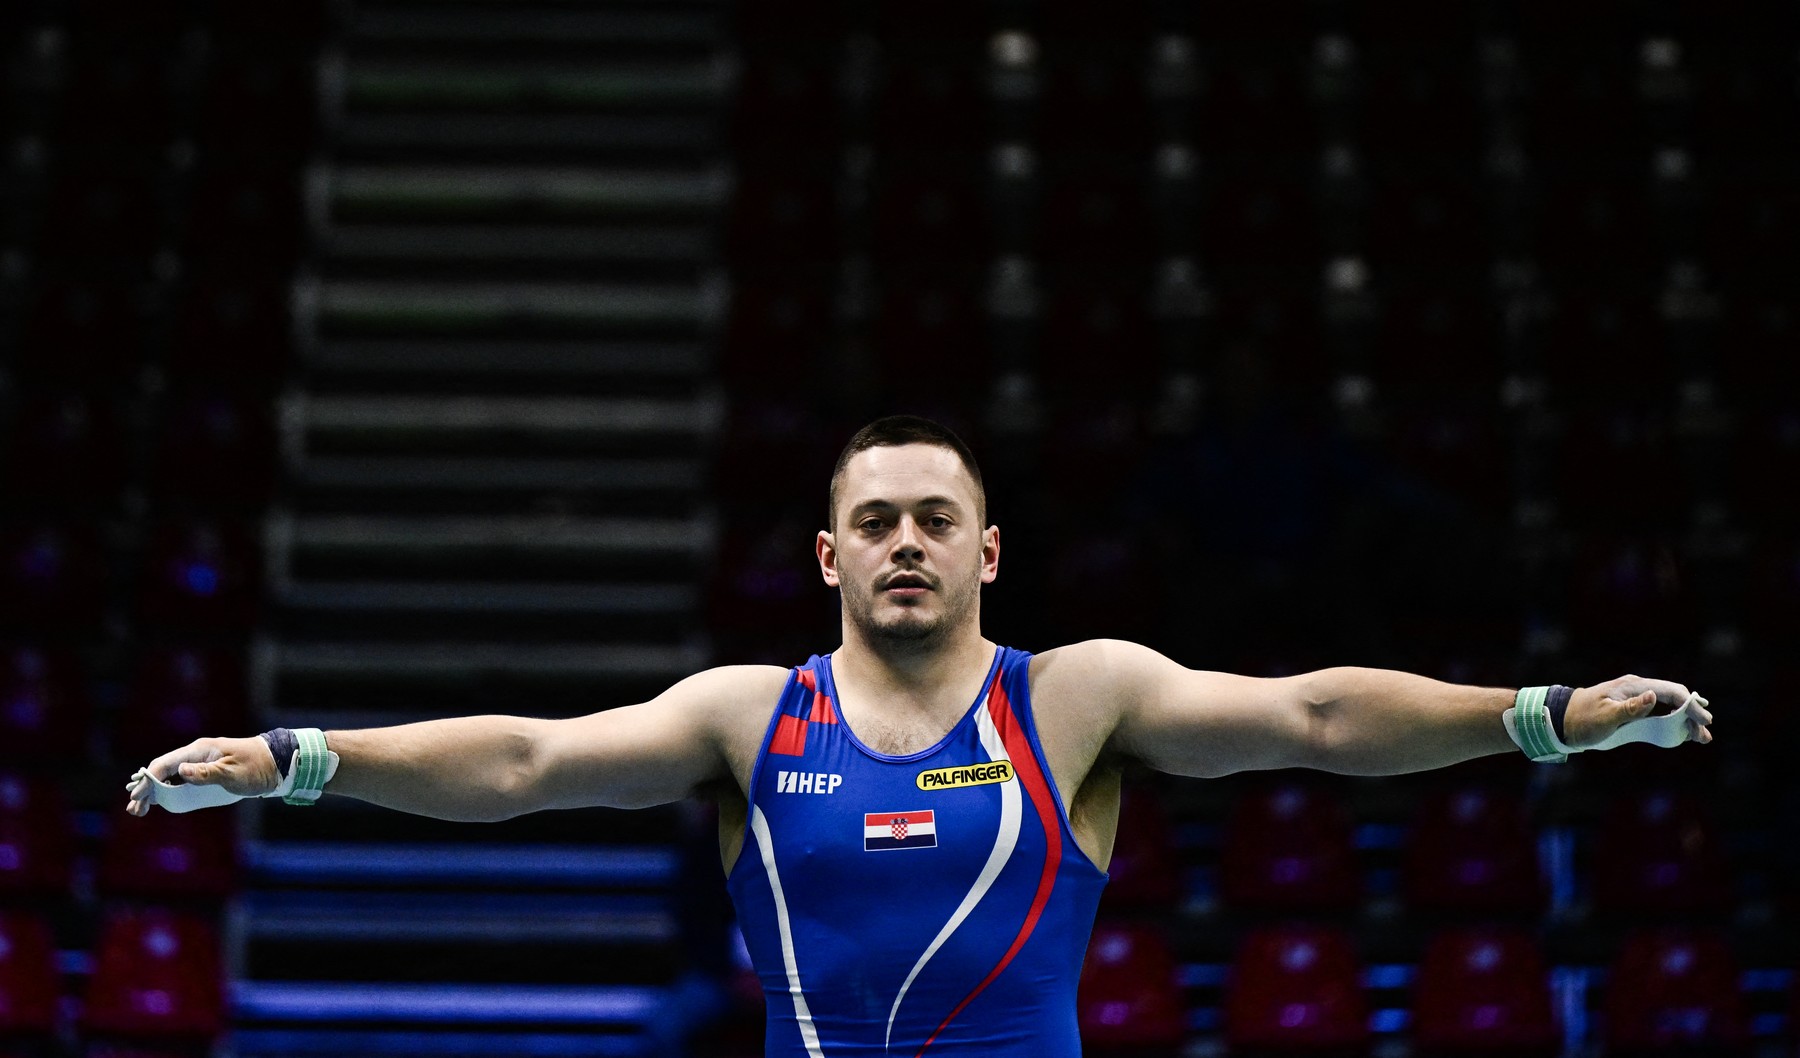 Croatia's Tin Srbic competes on the high bar (horizontal bar) during the Men's All-Around Finals plus qualification for Team and Invidual Apparatus Finals event at the Artistic Gymnastics European Championships, in Rimini, on the Adriatic coast, northeastern Italy, on April 24, 2024.,Image: 867580002, License: Rights-managed, Restrictions: , Model Release: no, Credit line: GABRIEL BOUYS / AFP / Profimedia